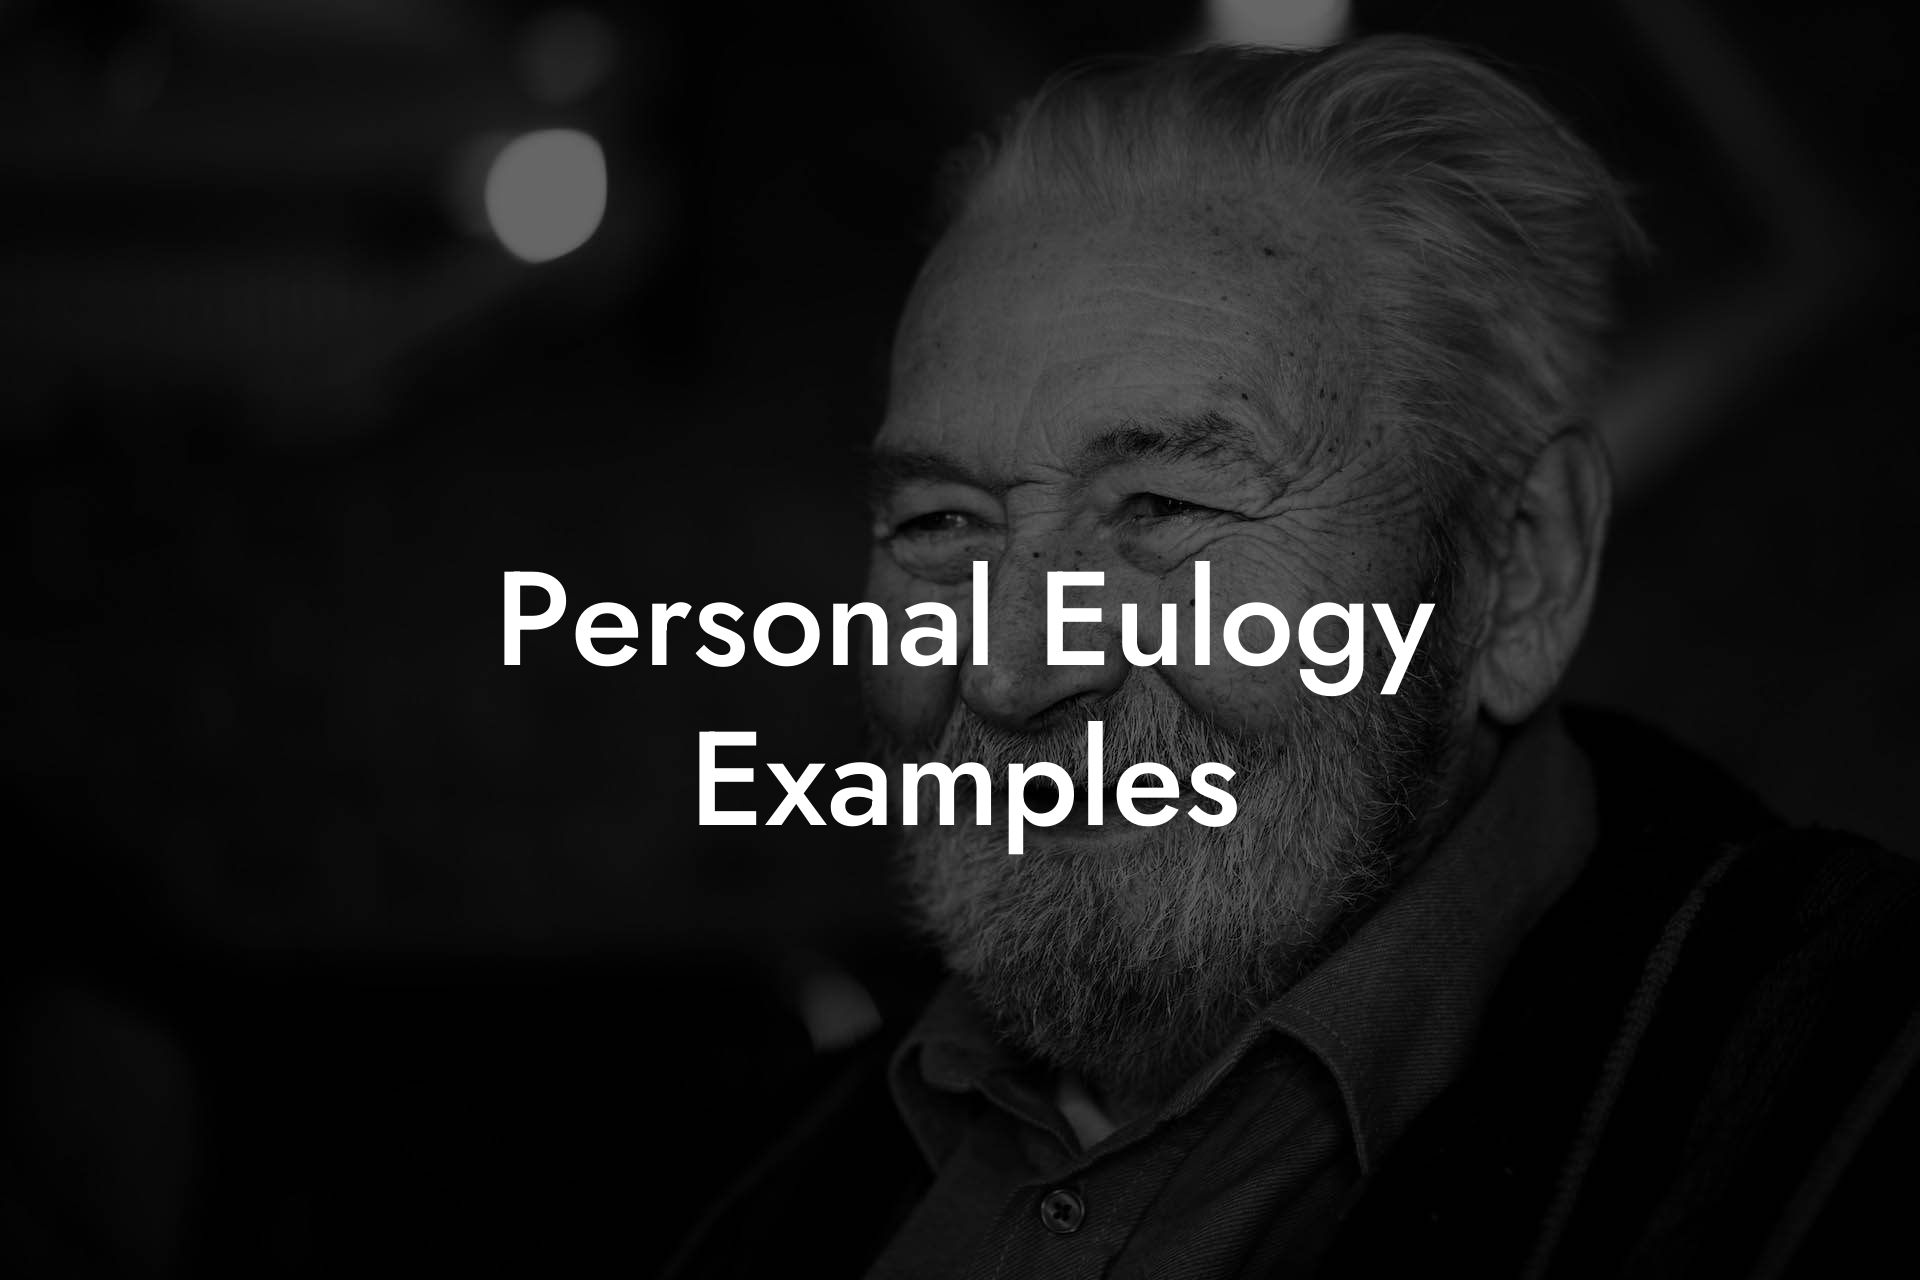 Personal Eulogy Examples